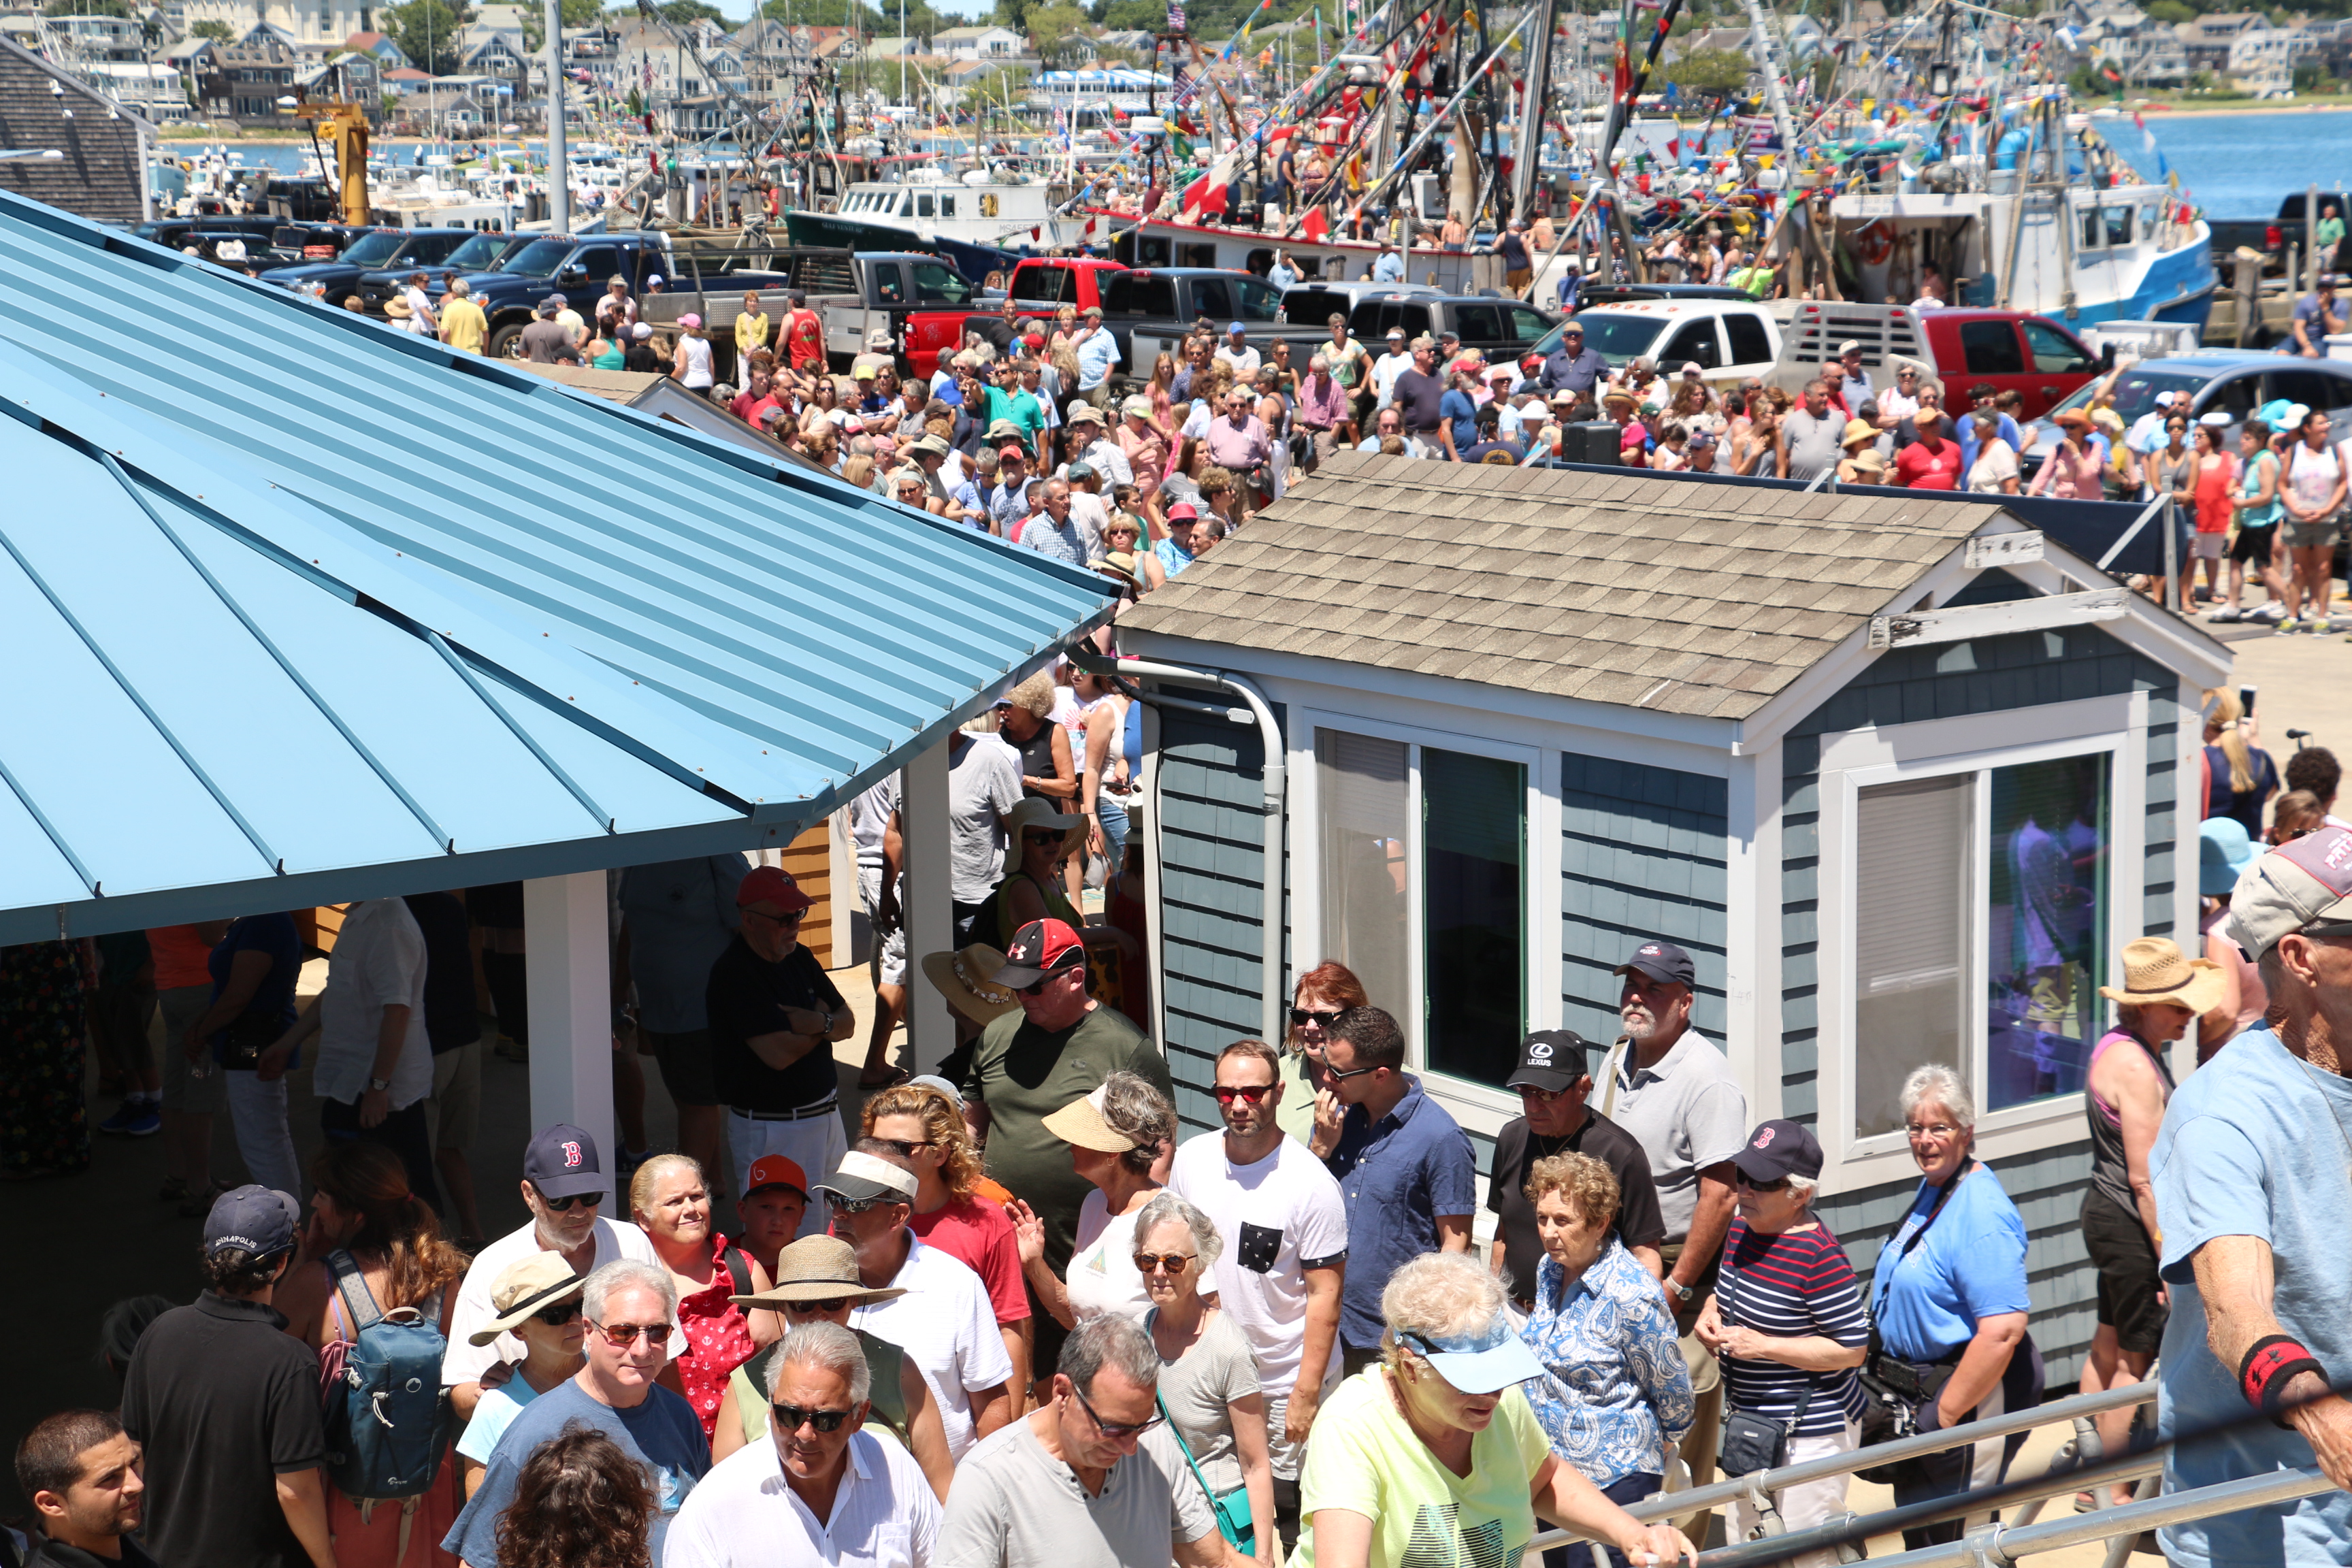 Crowds line up to board the ferry on which the bishop will stand to bless the fishing fleet.